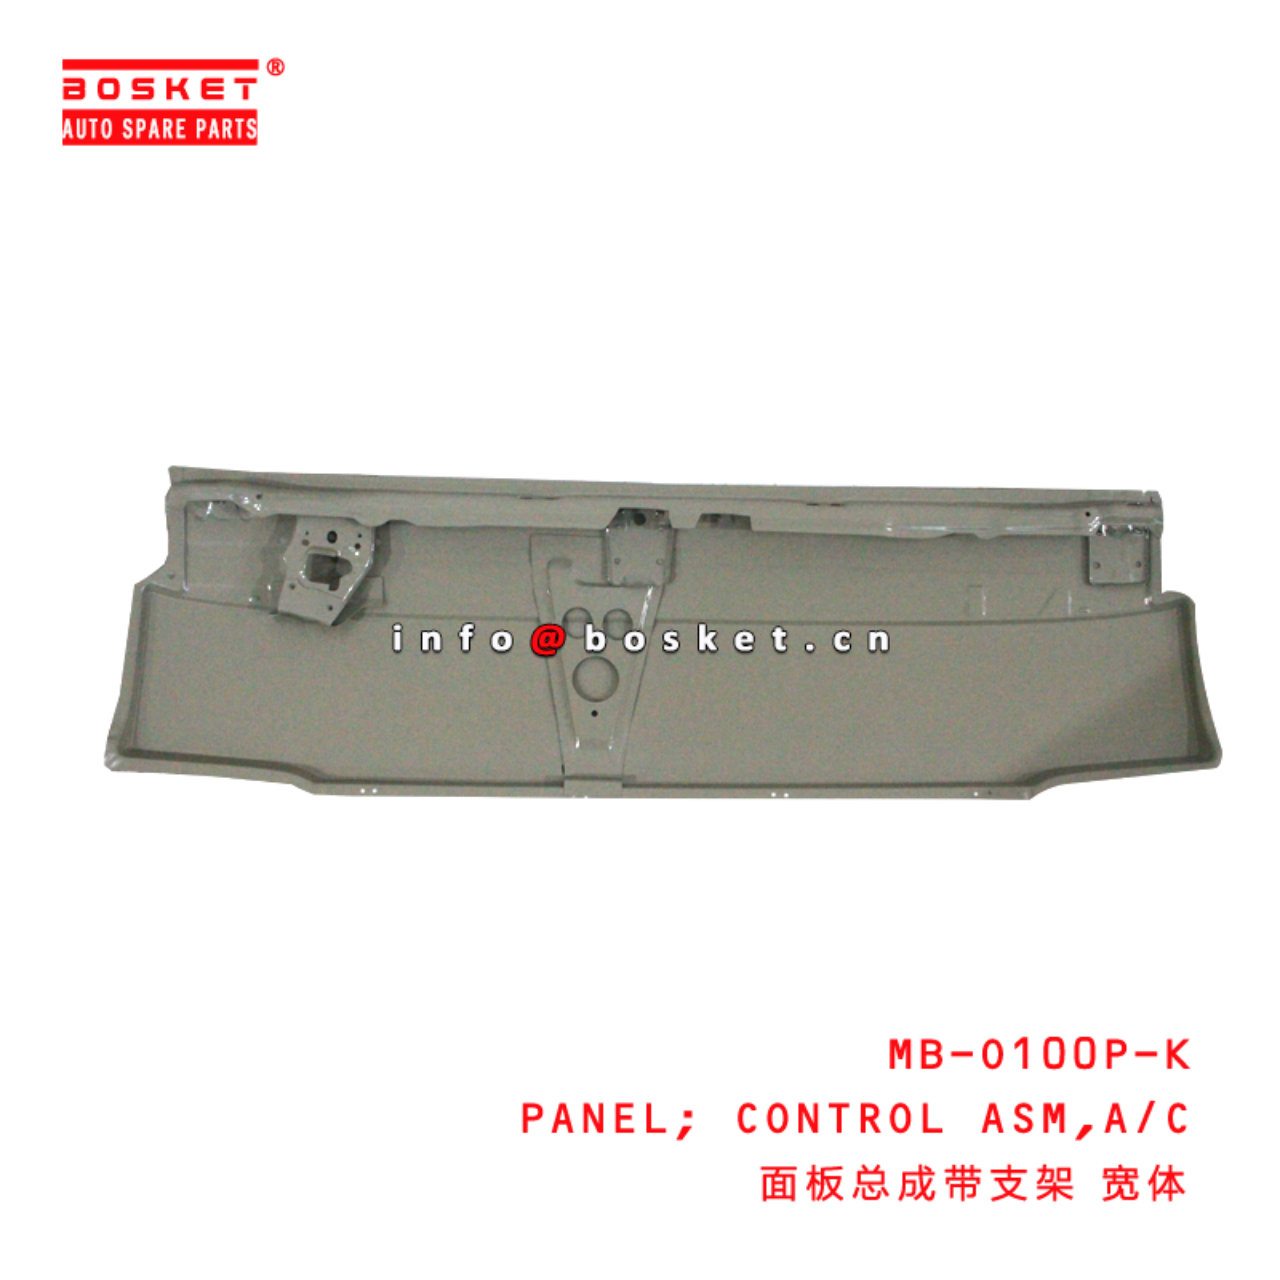 MB-O100P-K Air Compression CONTROL Assembly PANEL suitable for ISUZU 100P老款 MB-O100P-K